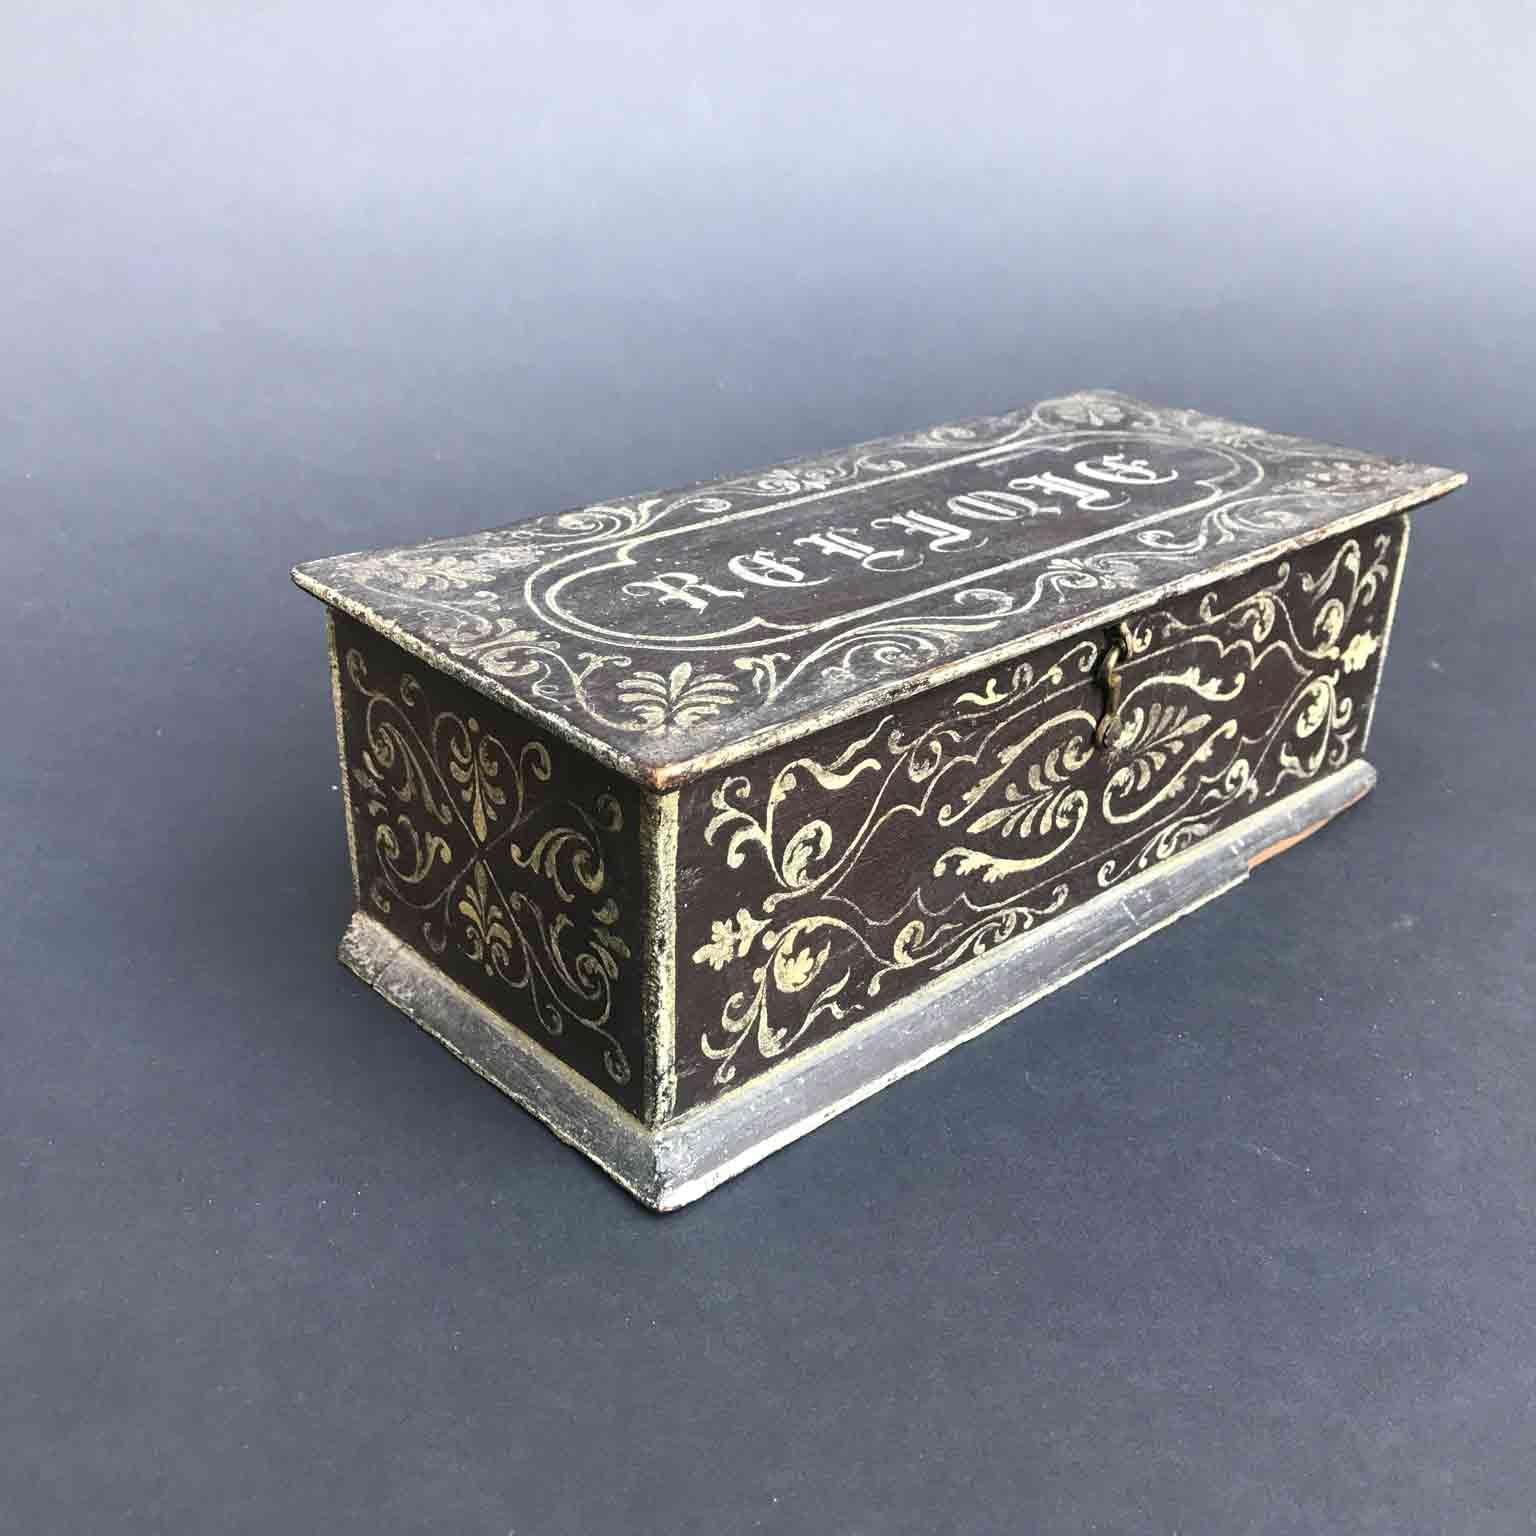 French 19th century lacquered rectangular shaped reliquary box, realized in oak, decorated with a dark brown/grey lacquering and a white scrolling and palmette pattern.
The lid shows the Gothic inscription Reliqie and closes with a hook. Blue